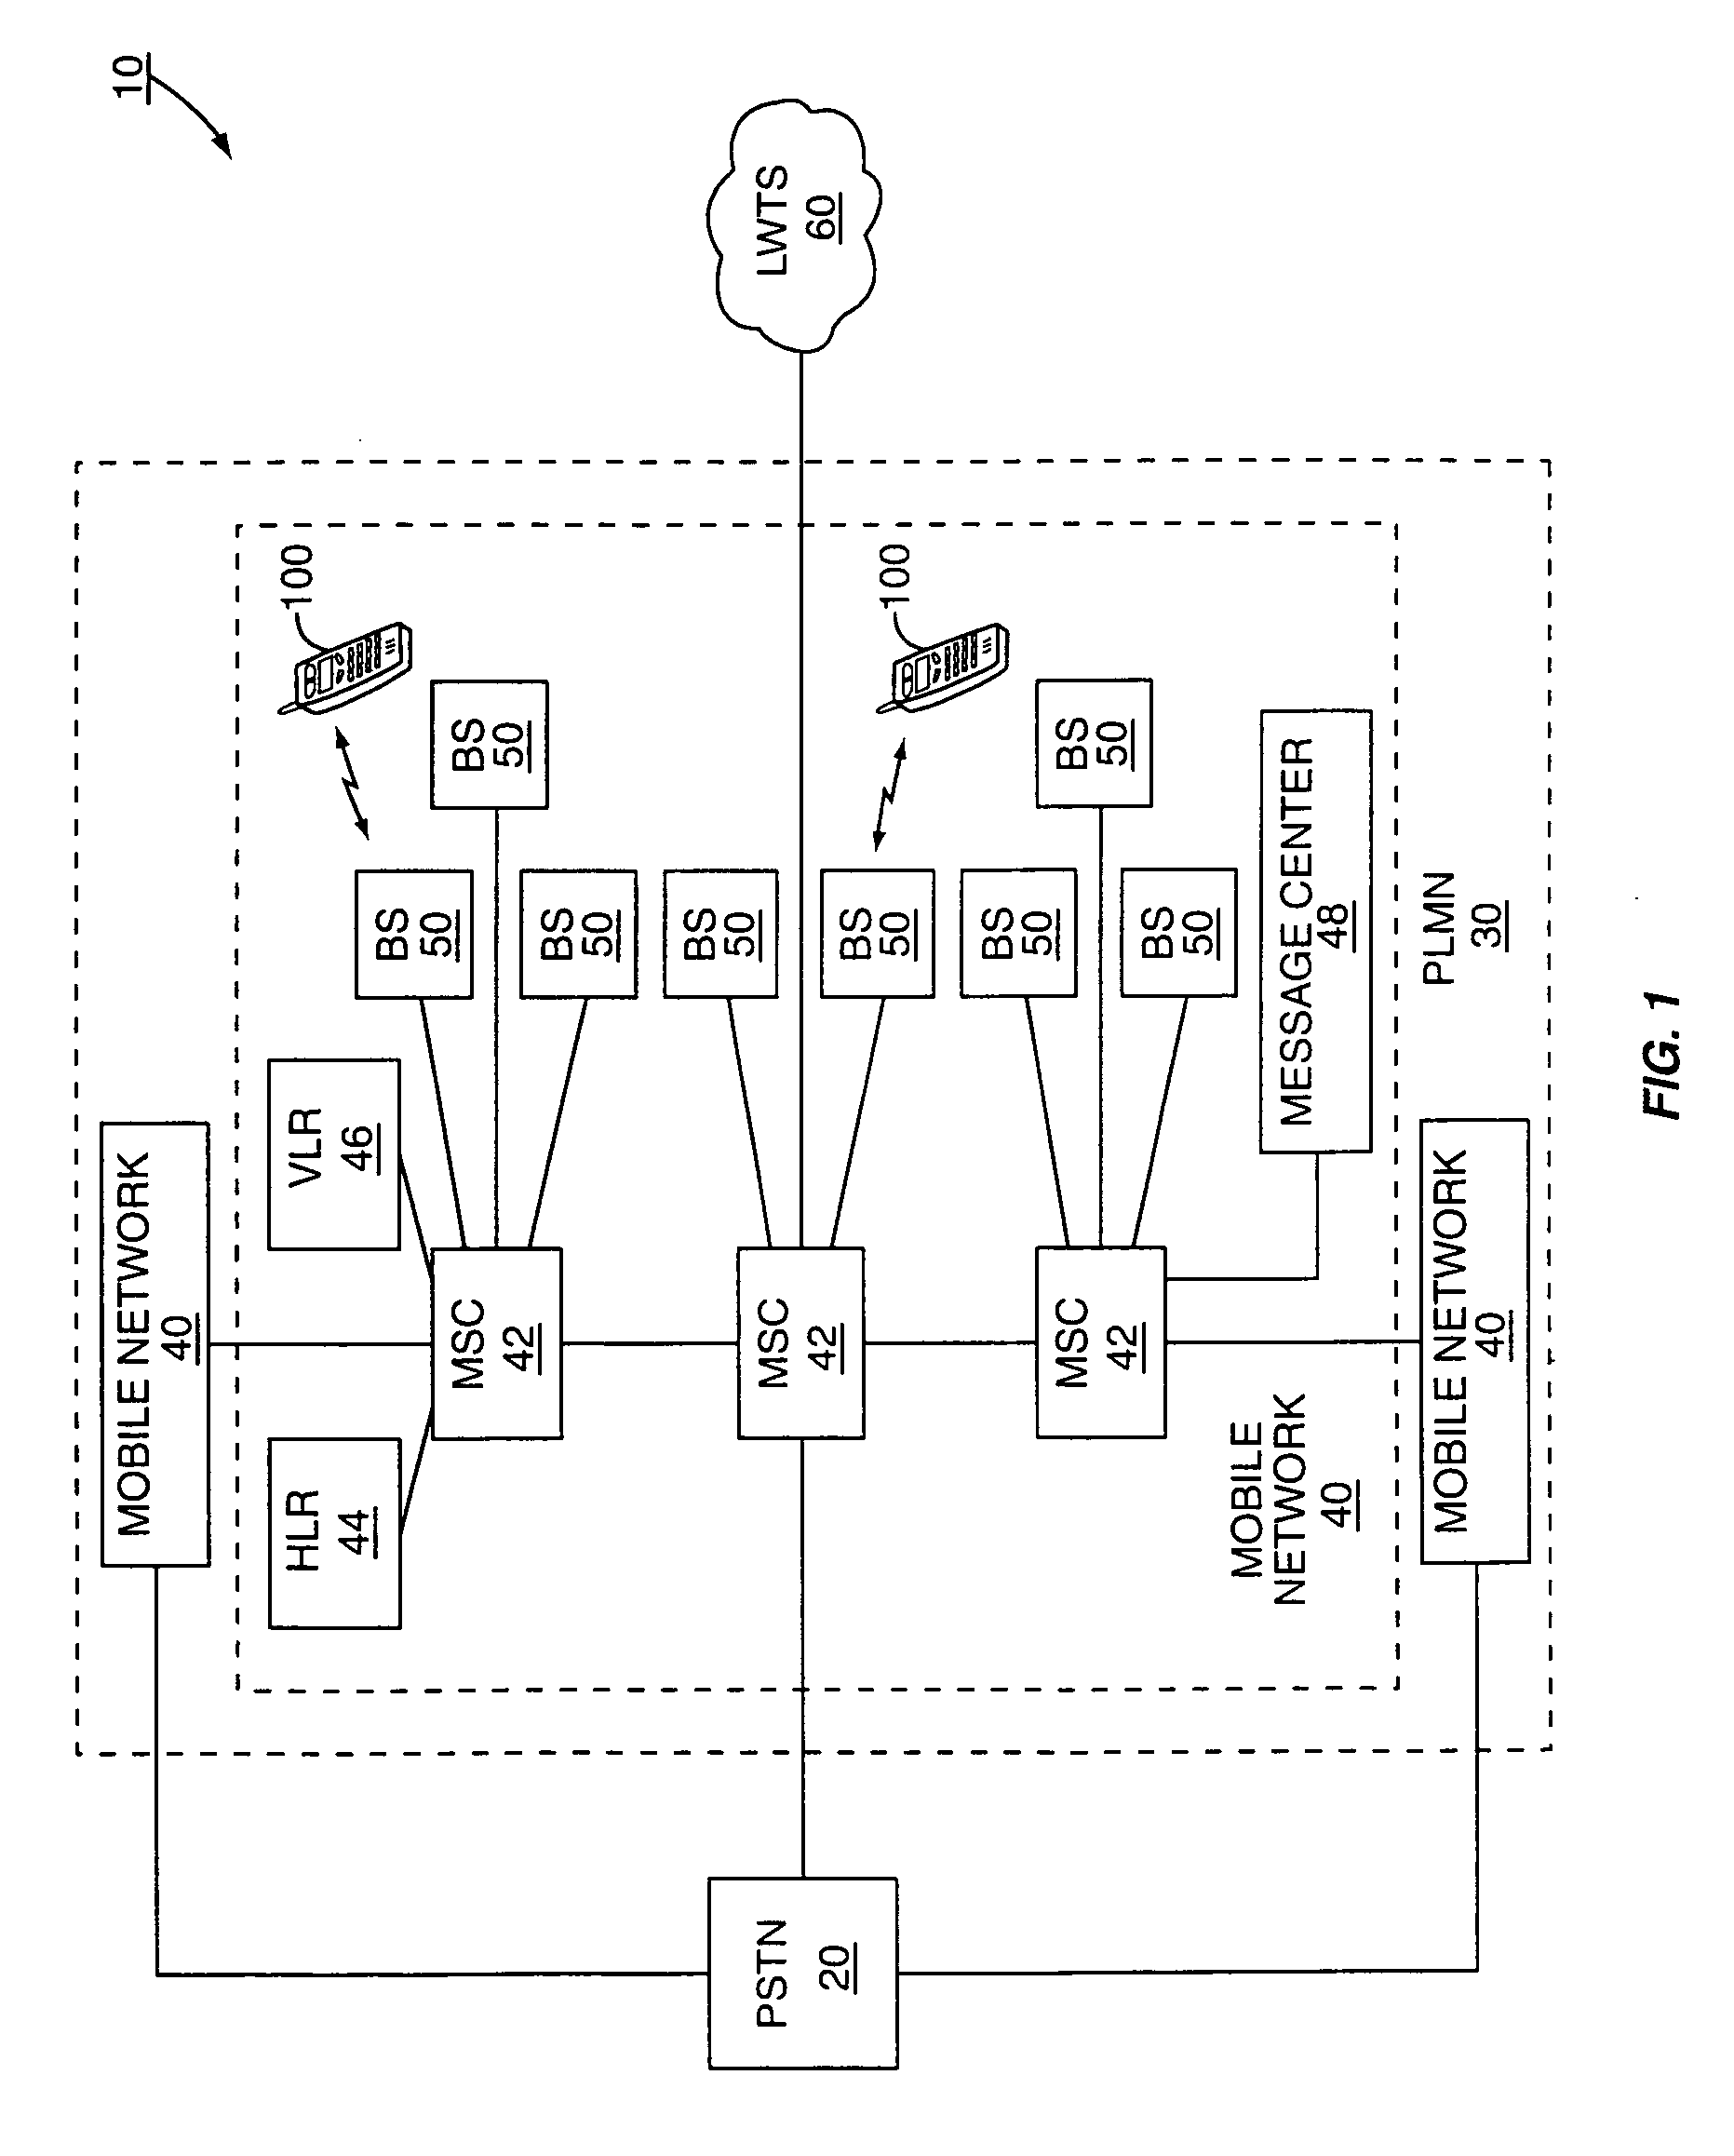 Position detection system integrated into mobile terminal